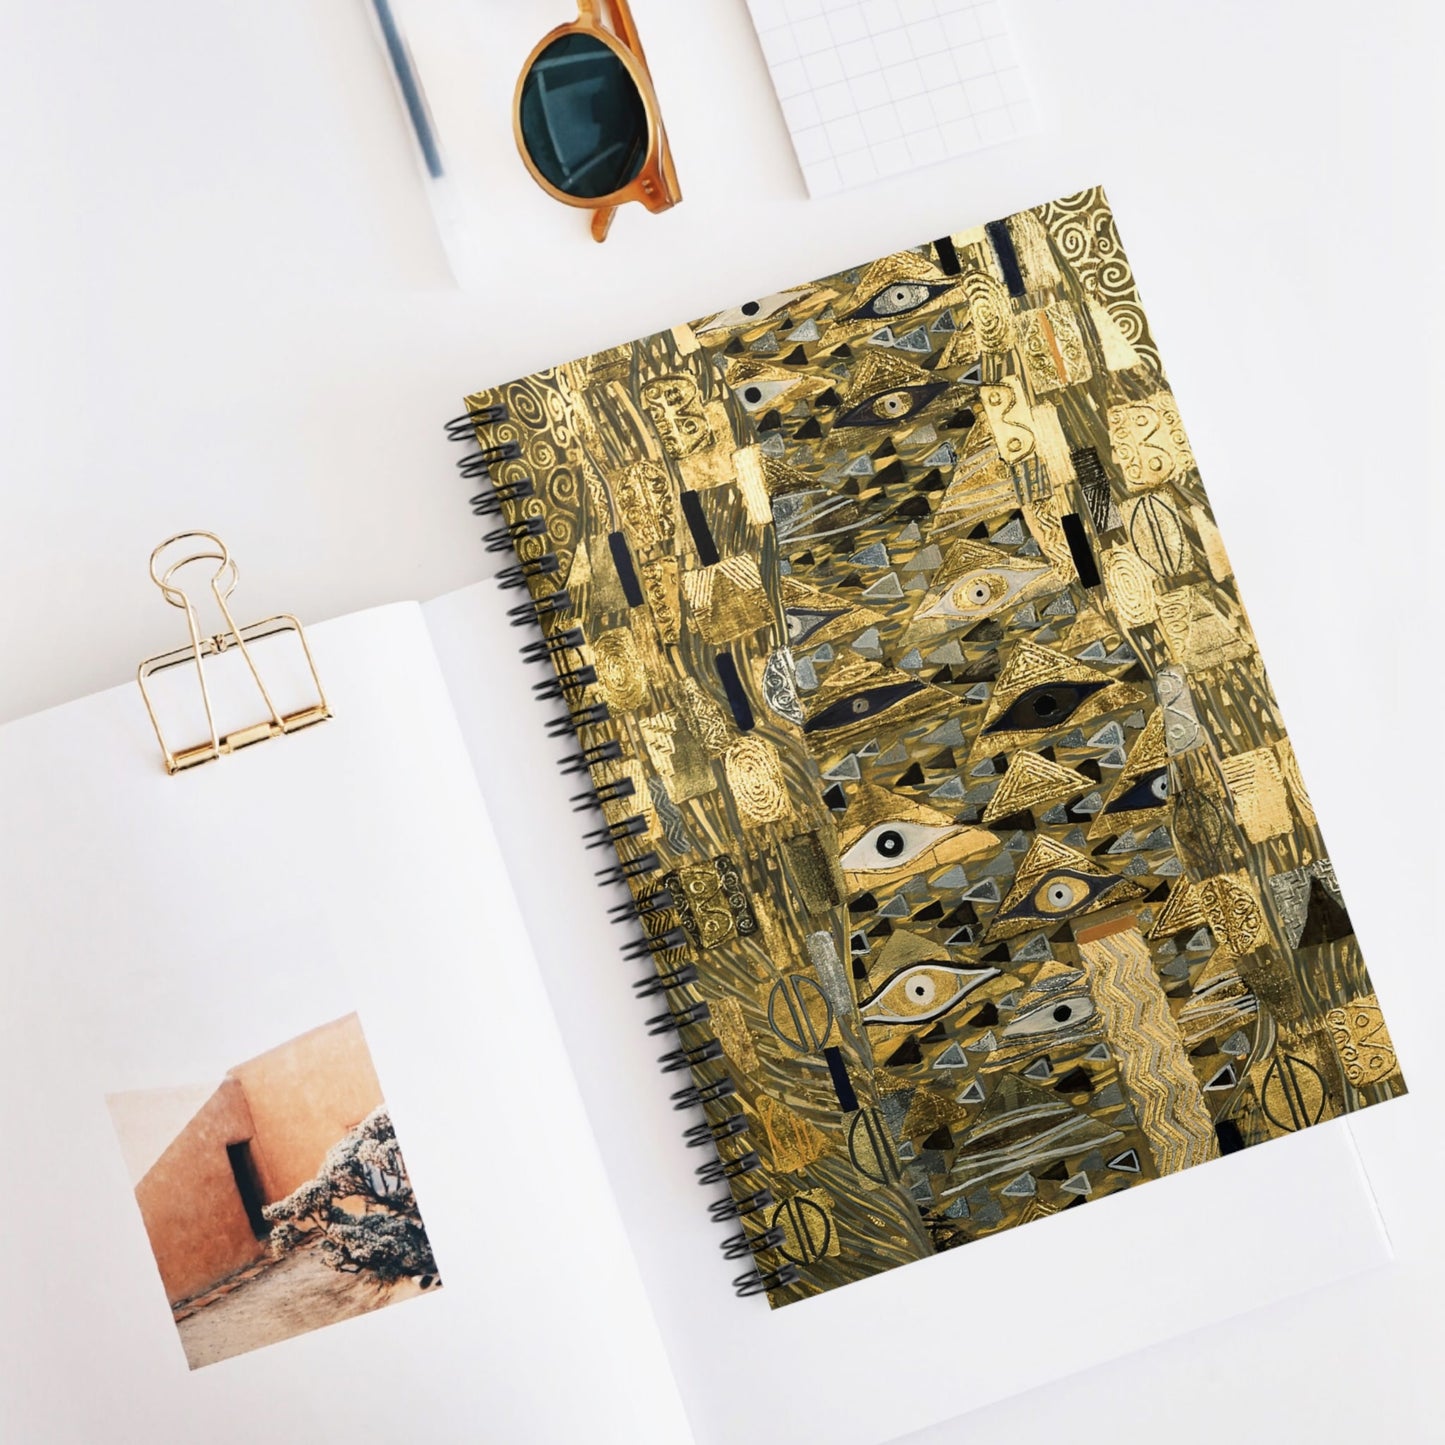 The Lady in Gold Spiral Notebook Displayed on Desk